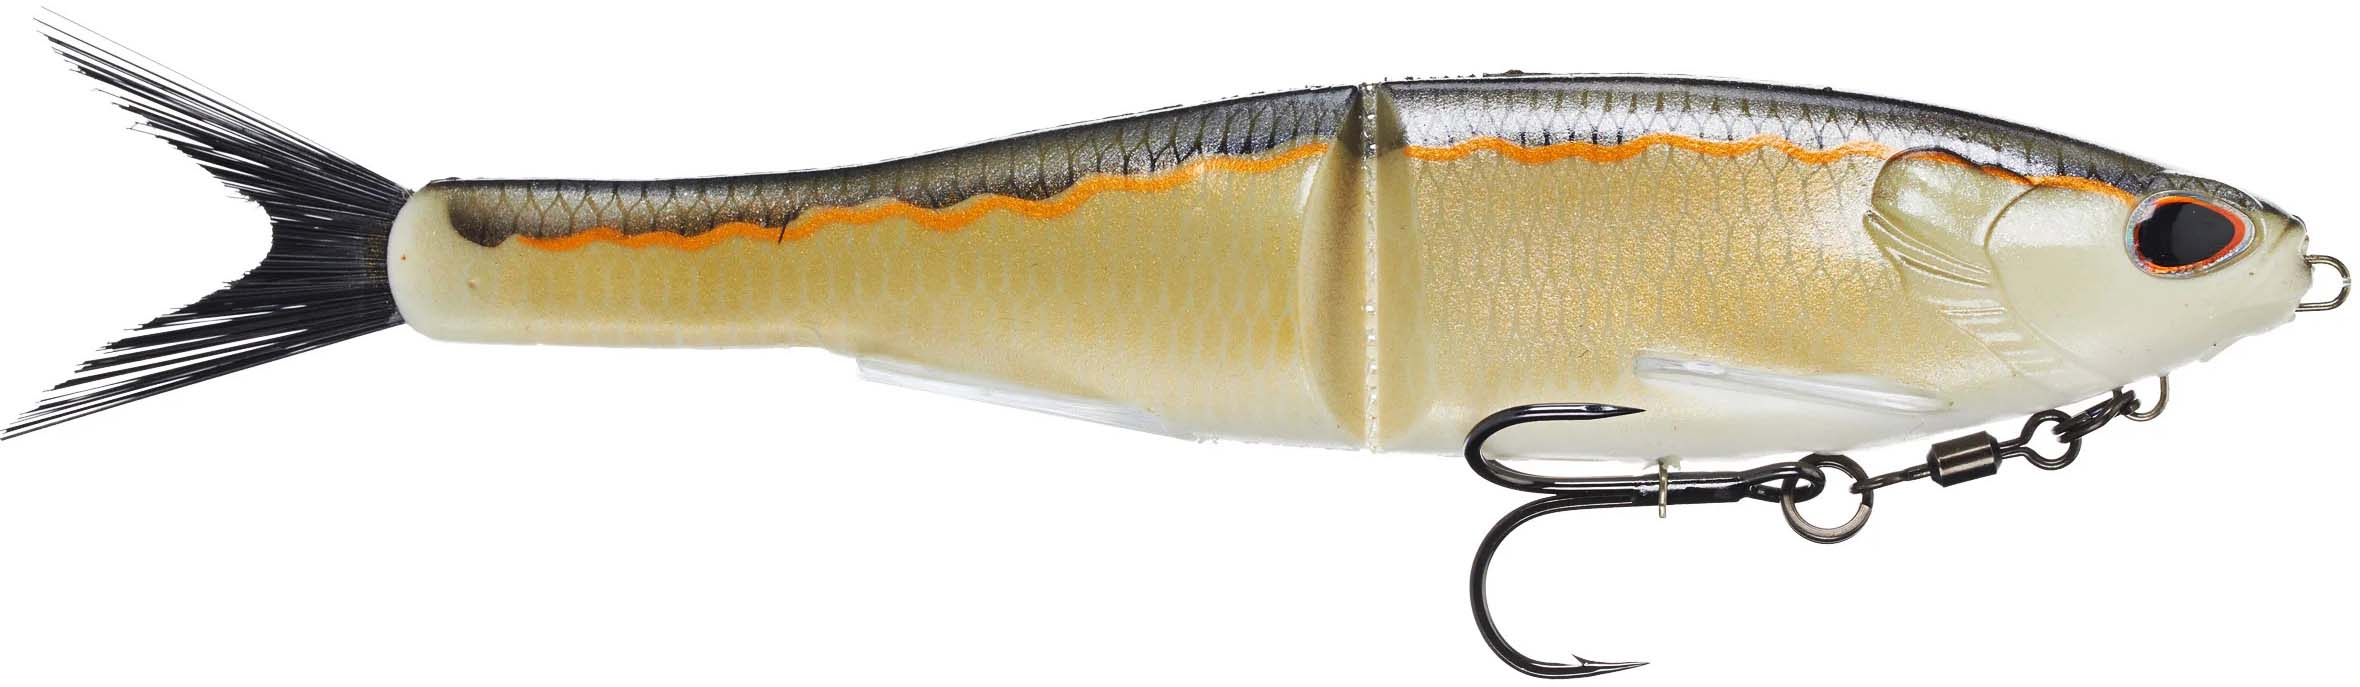 Storm Arashi Glide Bait Product Video with Mike Iaconelli 